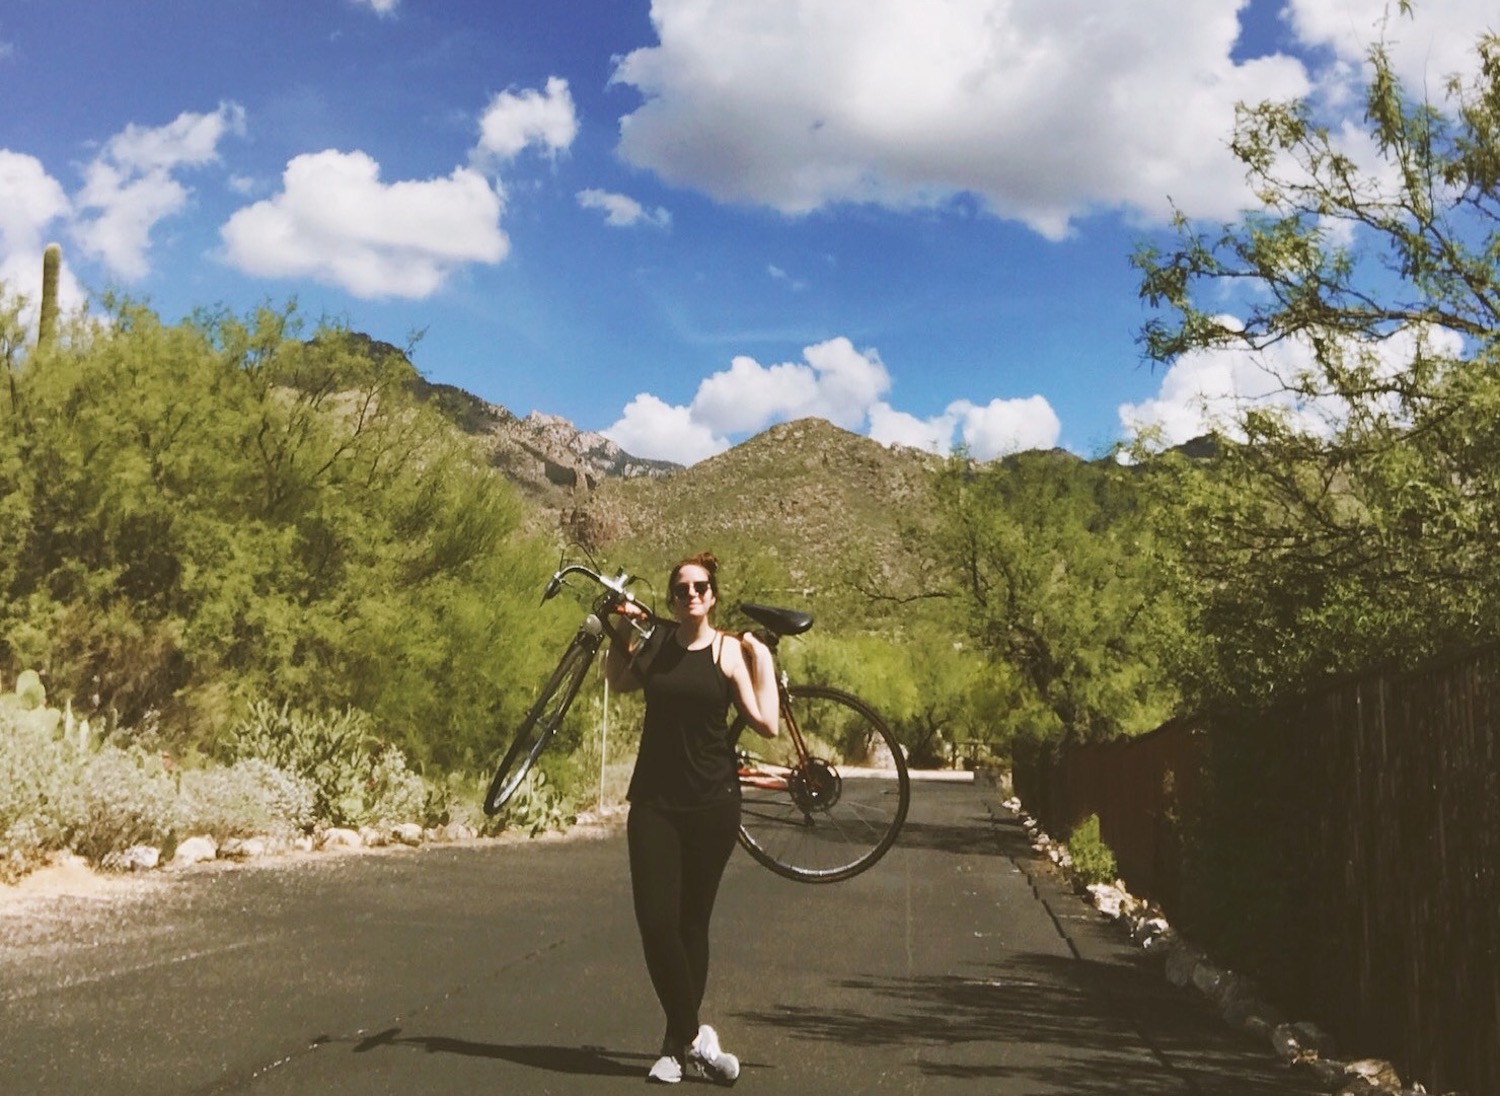 Marina bicycling in the Tucson desert